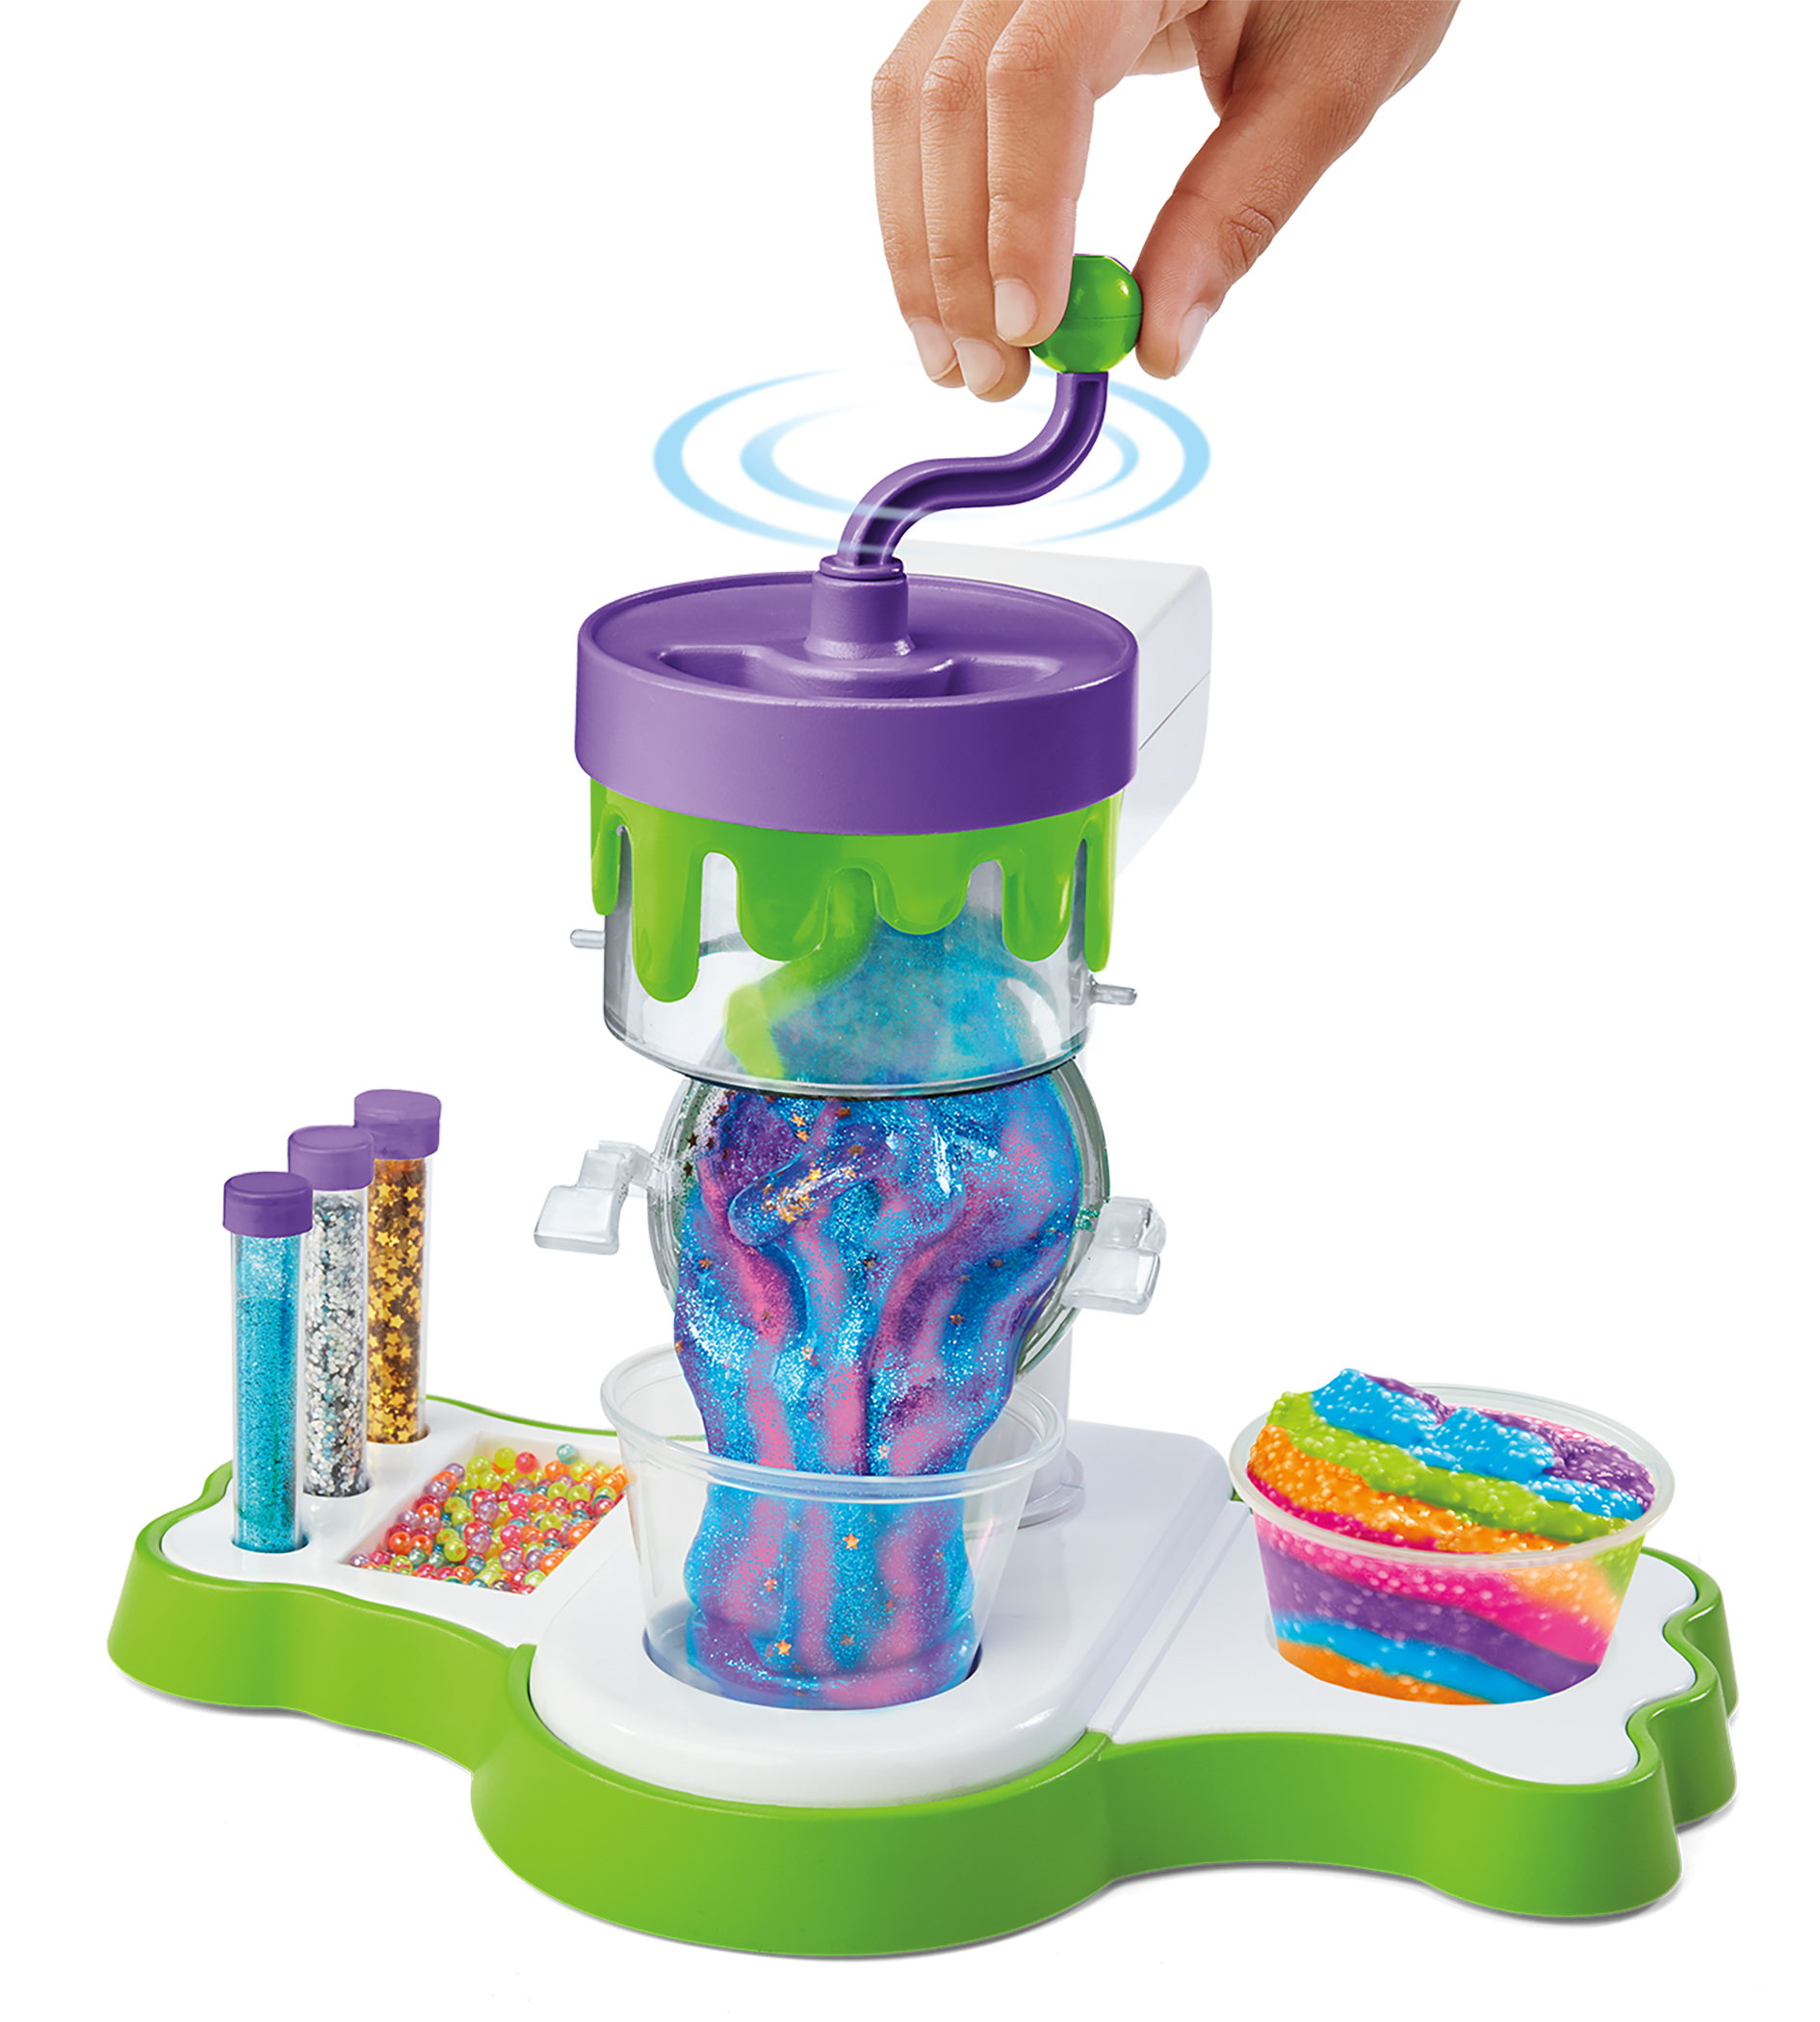 Cra-Z-Art - Nickleodeon Ultimate Slime Making Lab with Tabletop Mixer - image 6 of 12